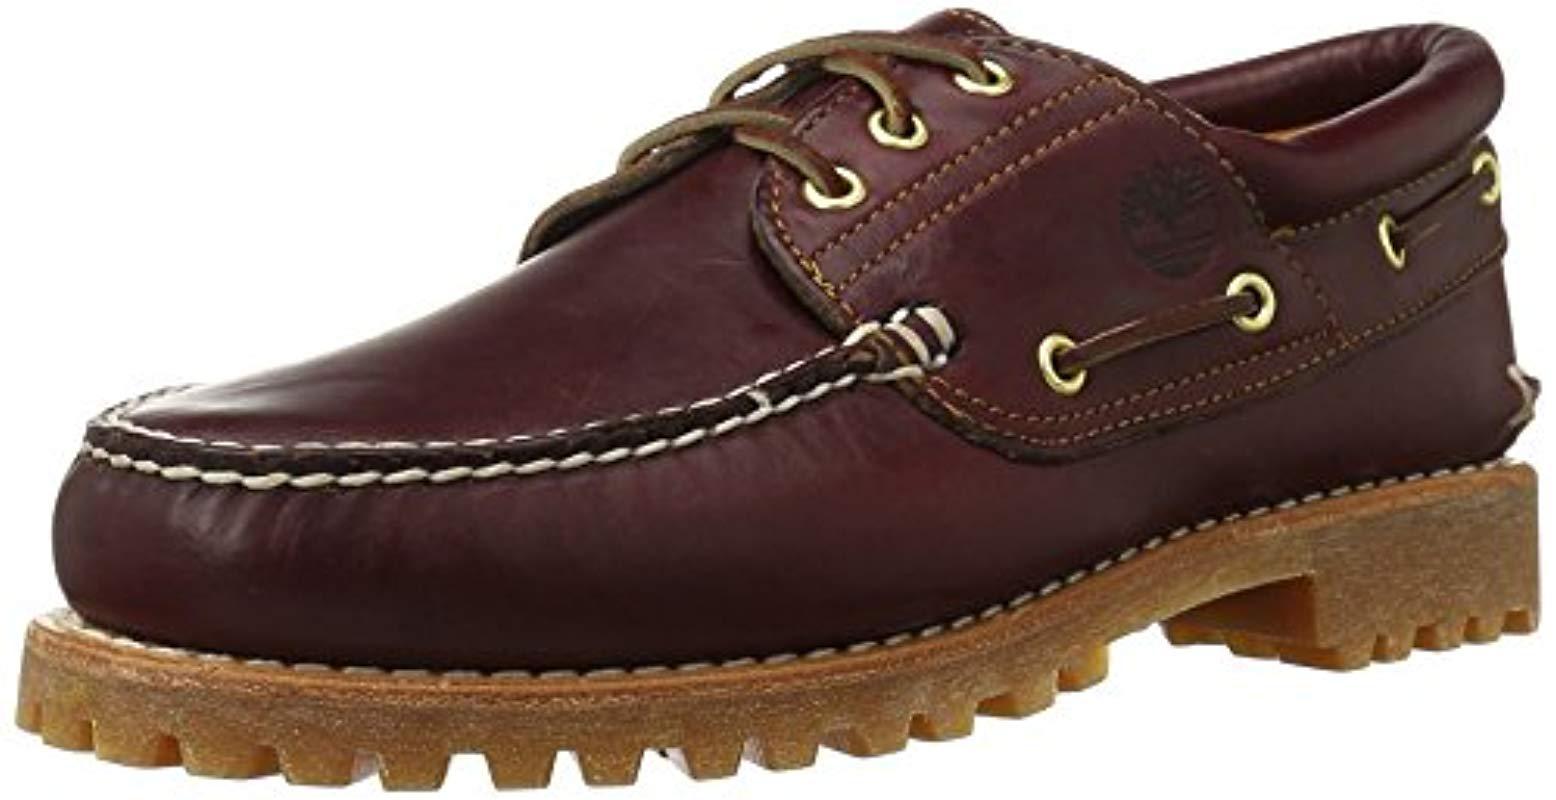 Lyst - Timberland 3 Eye Classic Lug Outsole Boat Shoe in Brown for Men ...